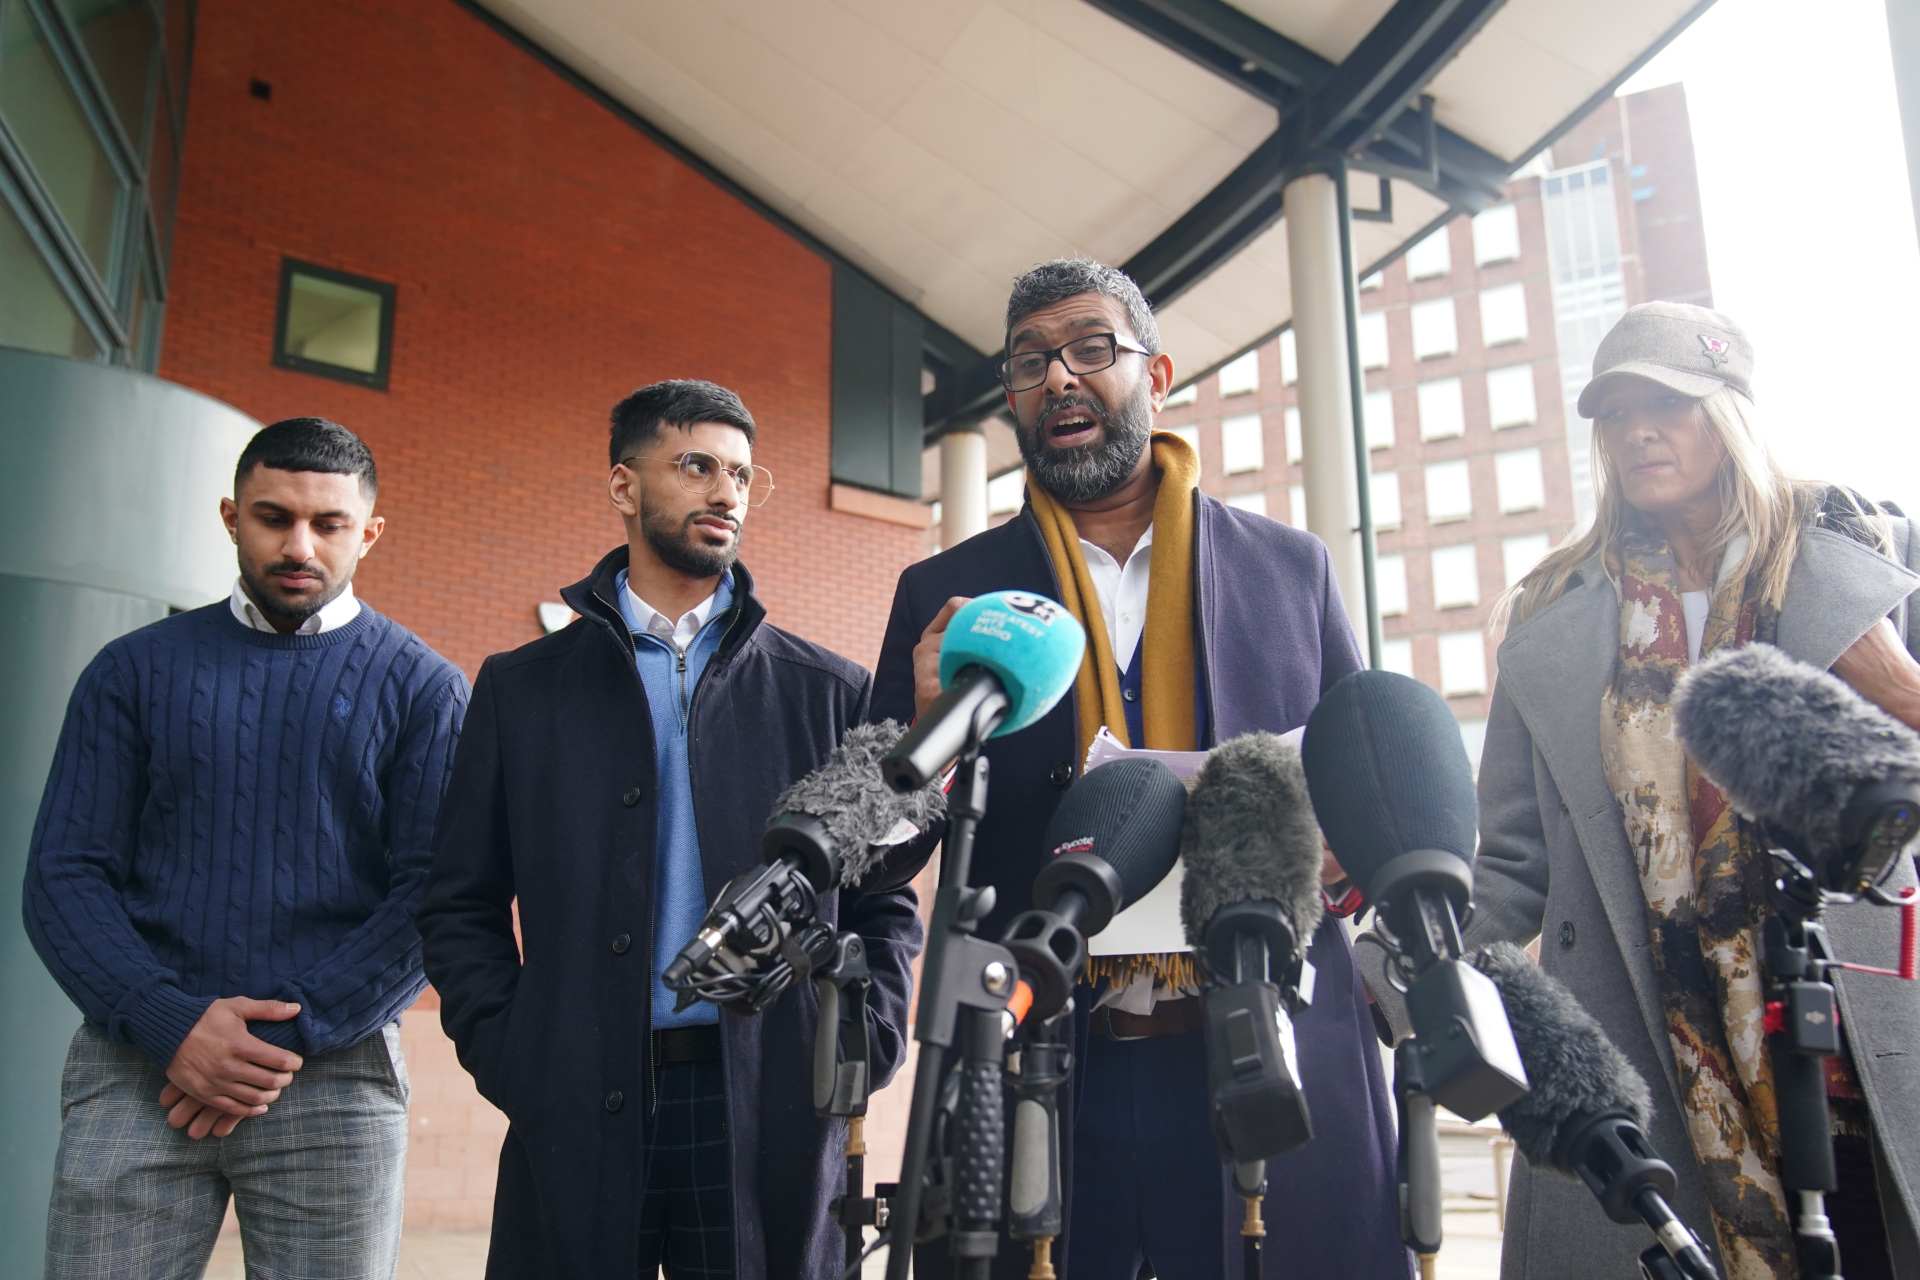 Mohammed Ramzan (second right), who was accused of trafficking by Eleanor Williams, with Nicola Holt (right), outside Preston Crown Court, Lancashire, where Williams was jailed for eight-and-a-half years for nine counts of perverting the course of justice after she claimed to have been the victim of an Asian grooming gang. Williams, 22, published pictures of her injuries and an account of being groomed, trafficked and beaten, on Facebook in May 2020, in a post which was shared more than 100,000 times. Picture date: Tuesday March 14, 2023. (Photo by Peter Byrne/PA Images via Getty Images)